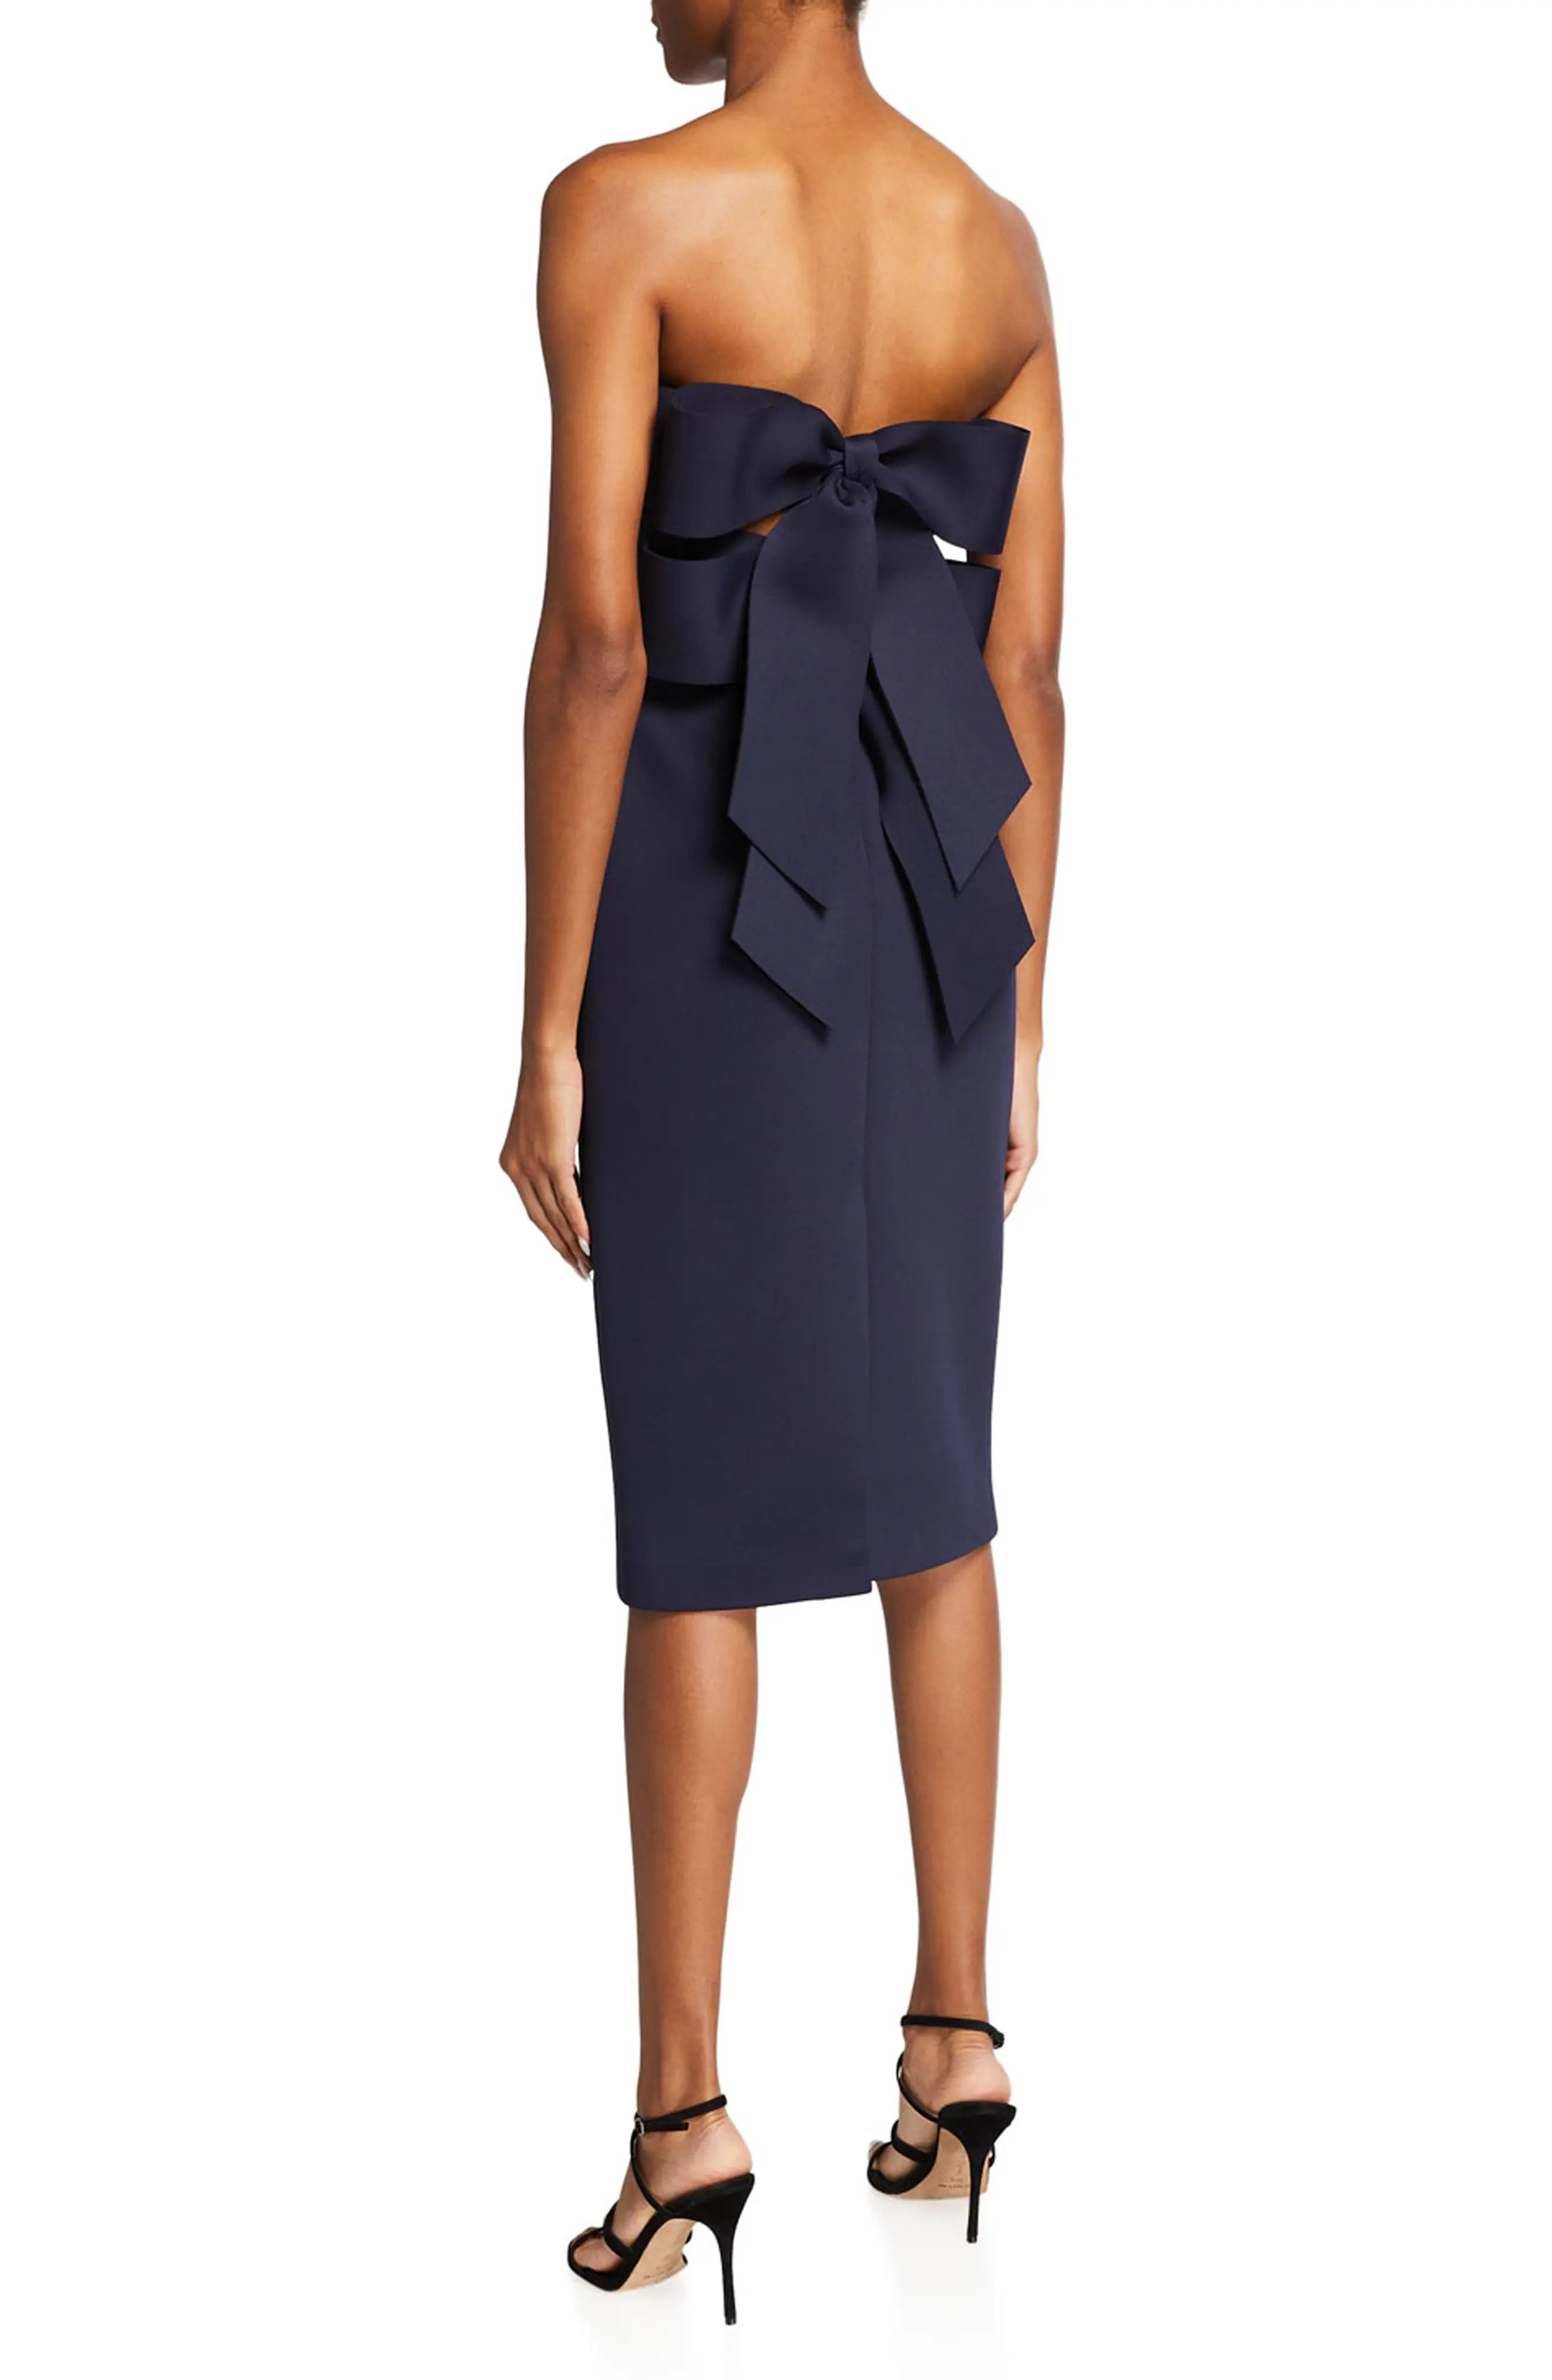 Badgley Mischka Collection Bow Back Scuba Dress in Navy at Nordstrom, Size 0 | Nordstrom